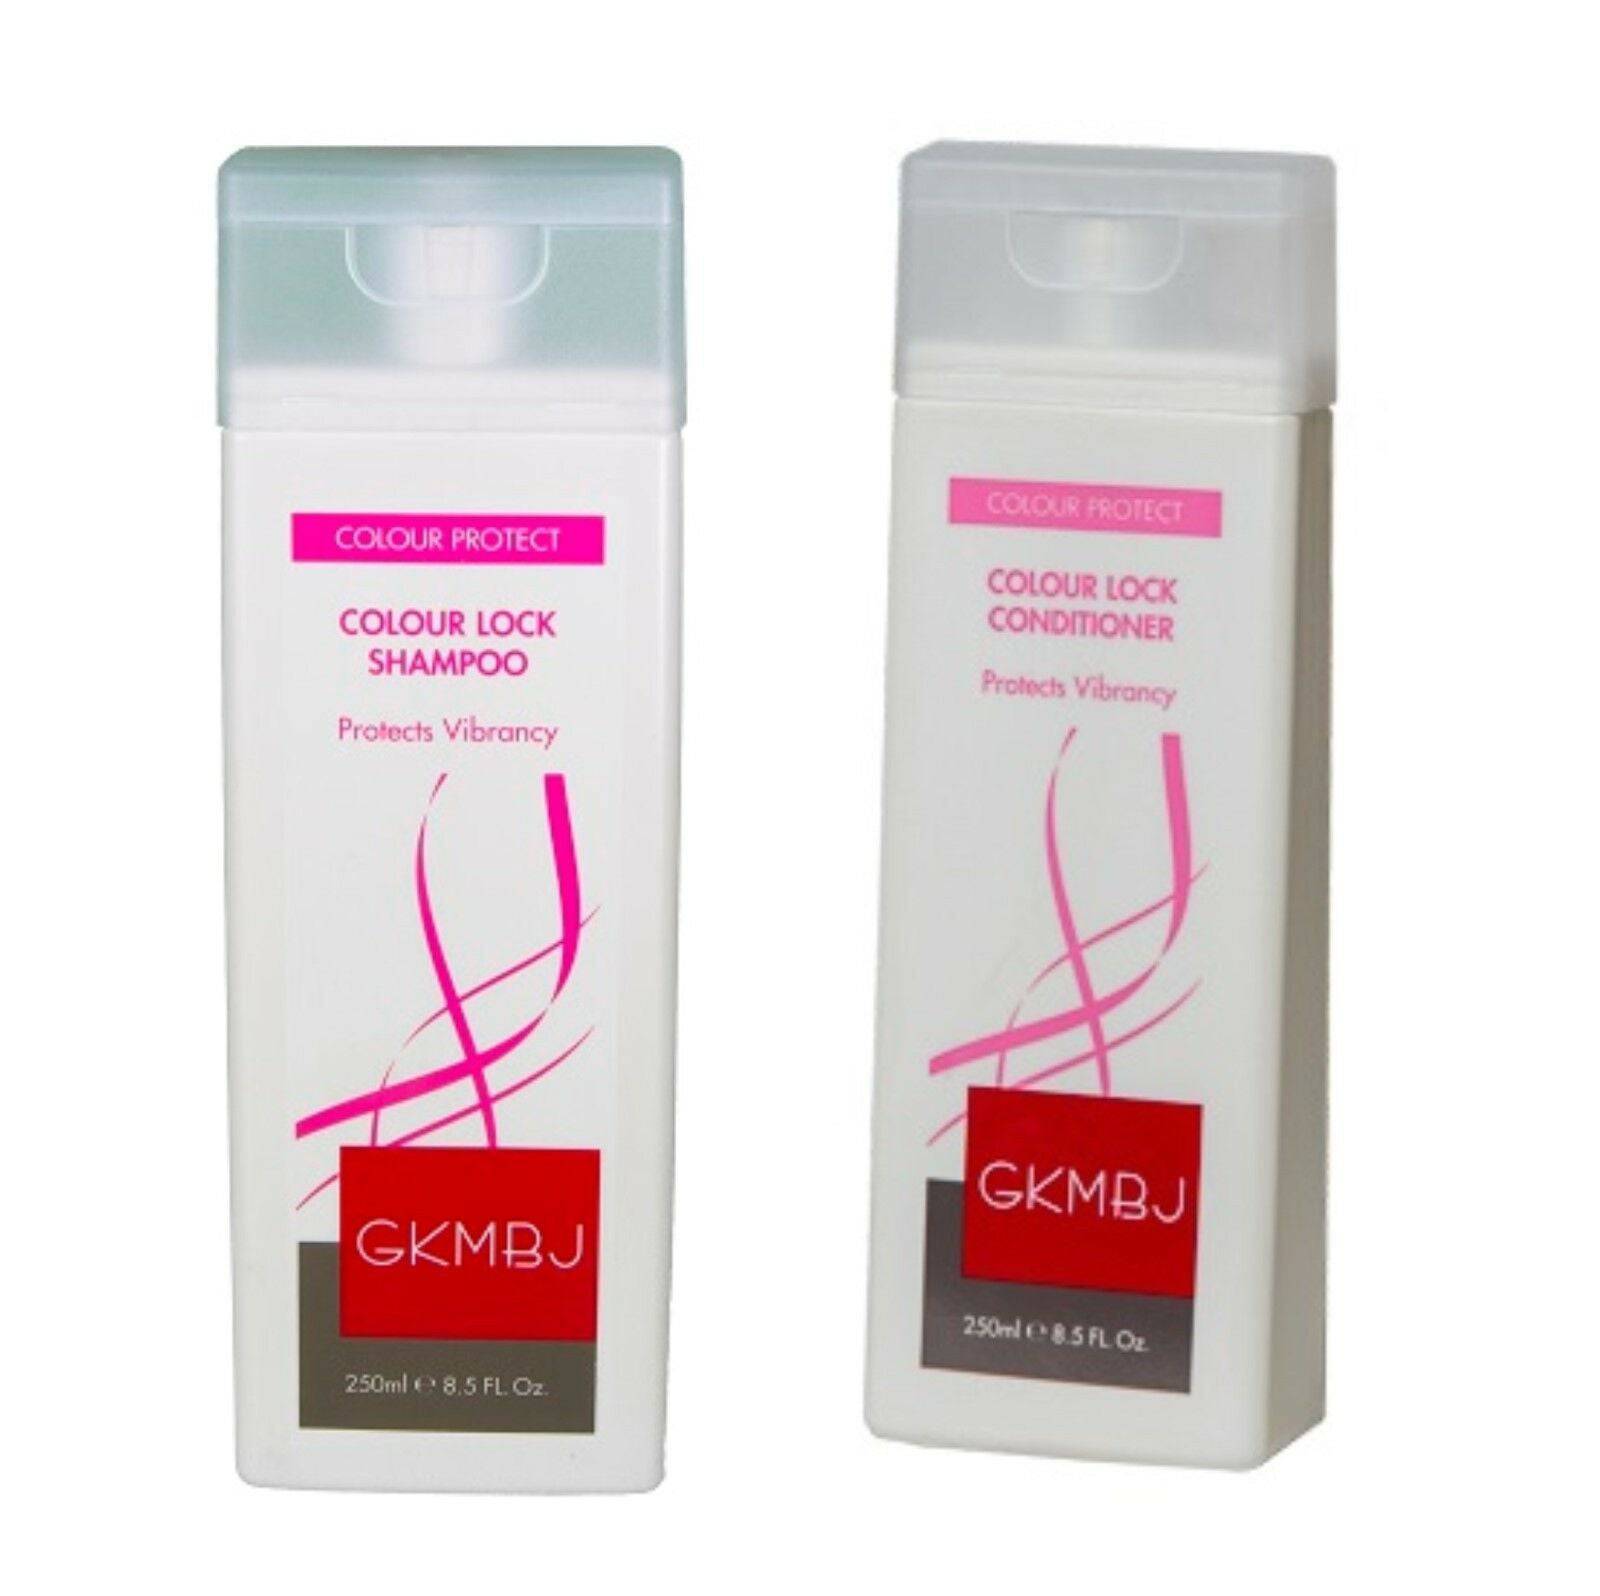 GKMBJ Colour Lock Shampoo & Conditioner 250ml each Protects Vibrancy - On Line Hair Depot